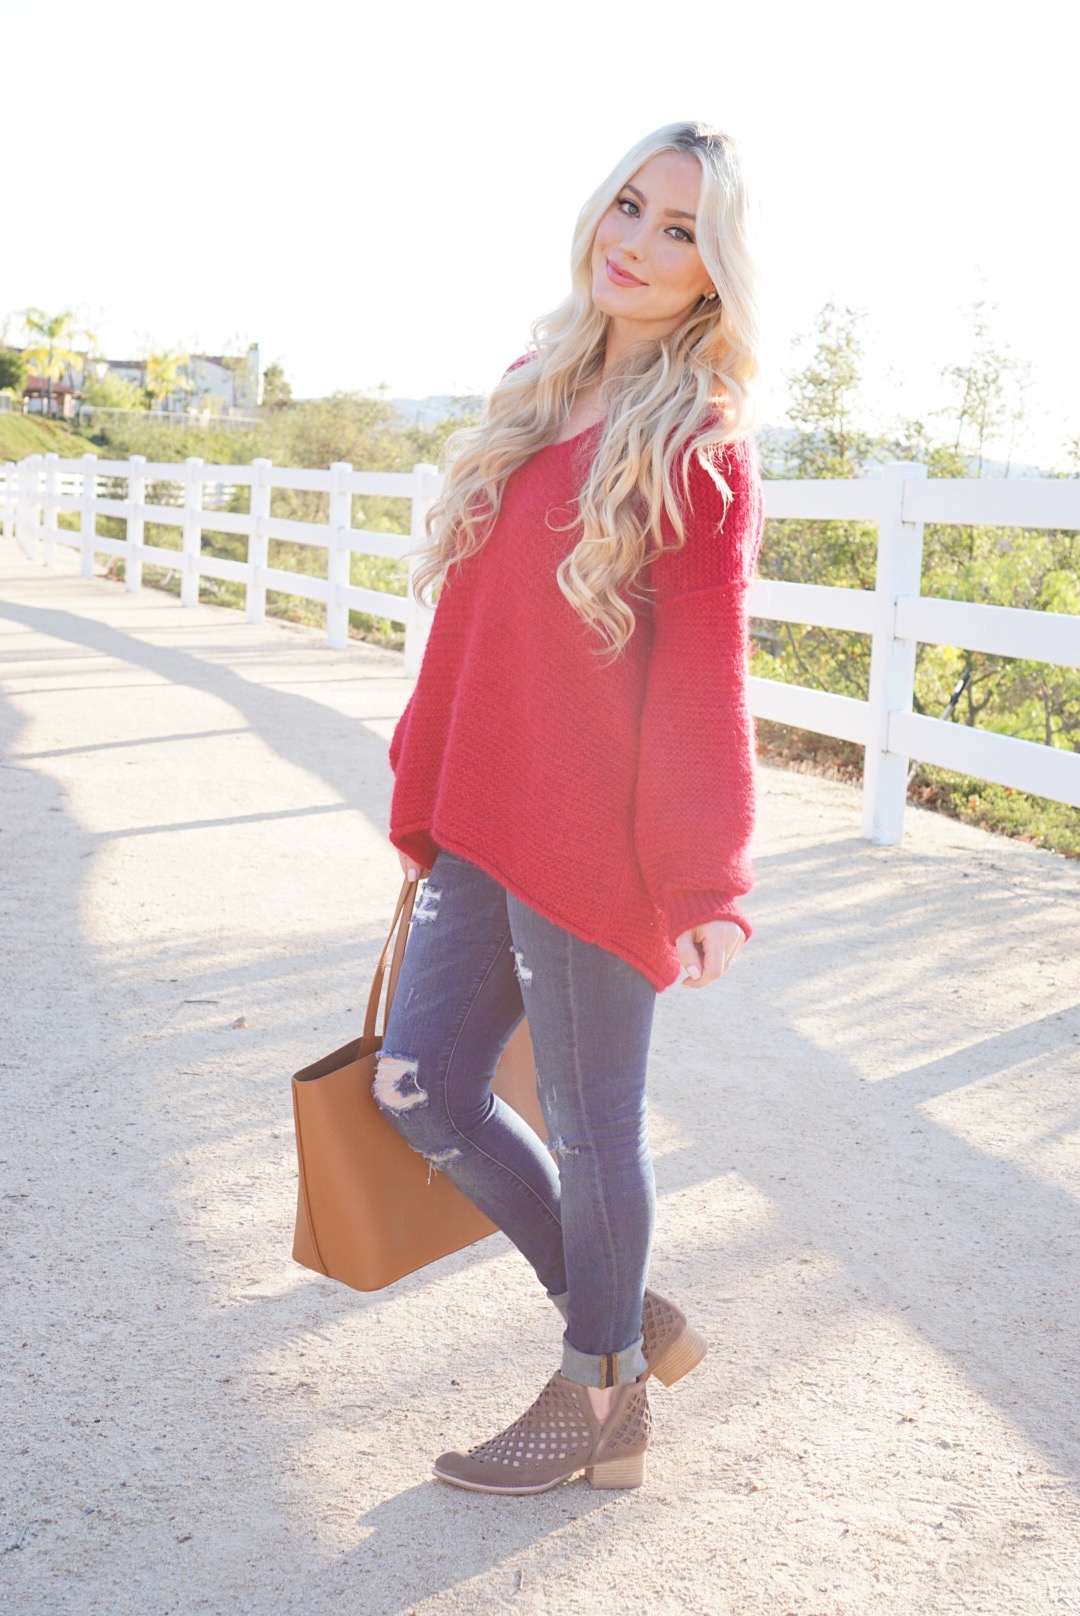 Katelyn Jones A Touch of Pink Slouchy Sweater Nordstrom Free People Jeffery Campbell